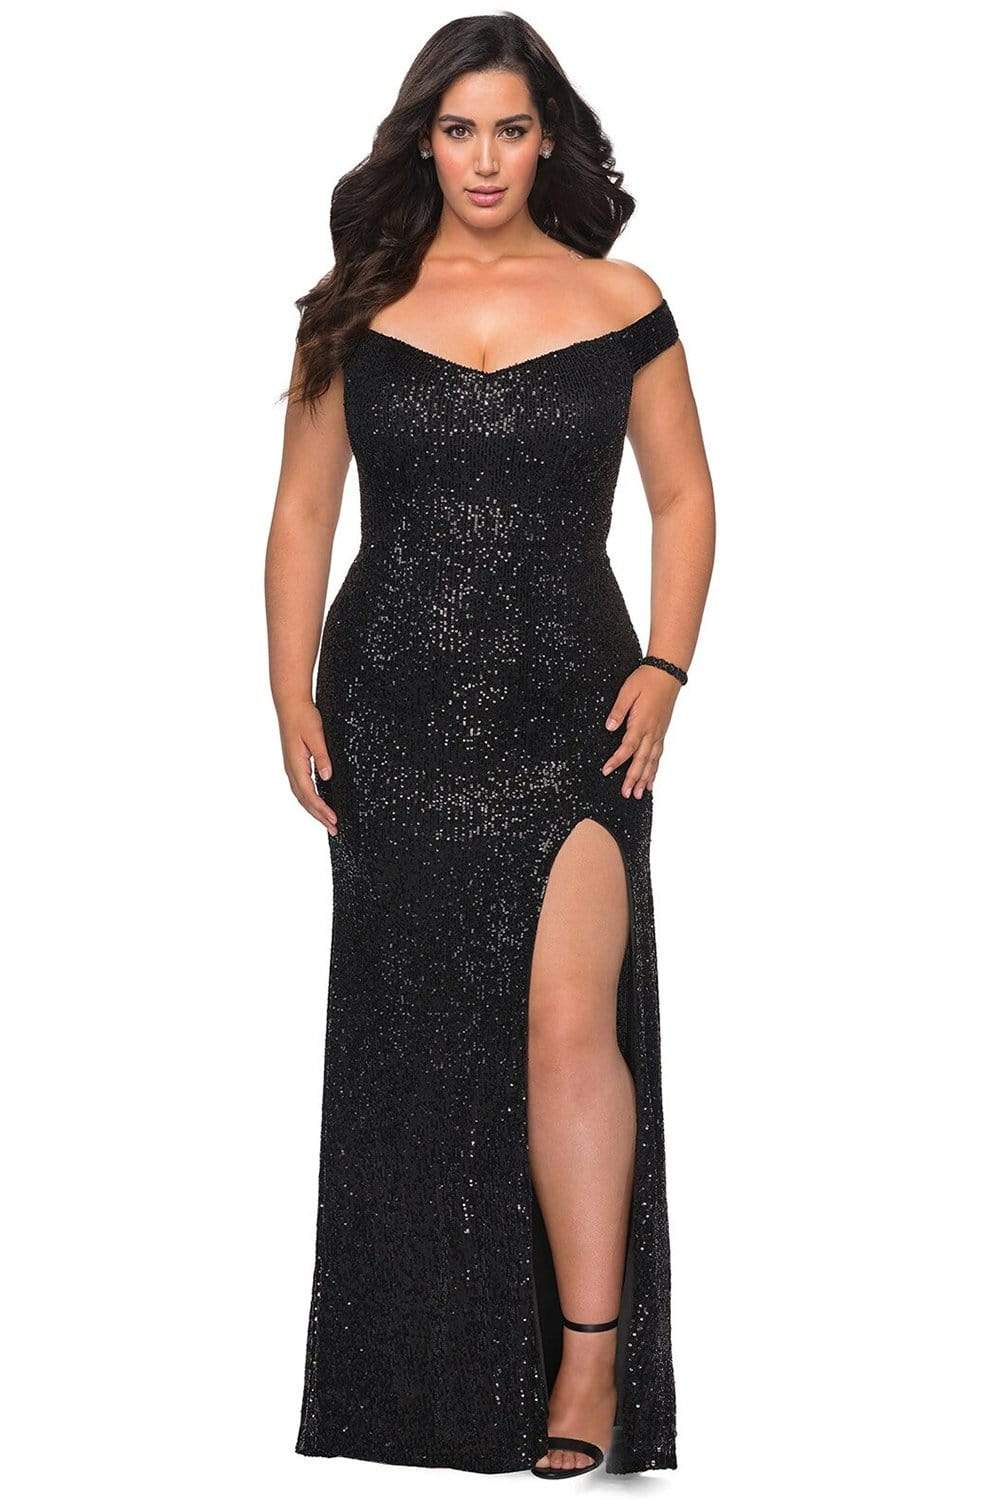 Image of La Femme - 29023 Sequined High Slit Sheath Plus Size Prom Gown